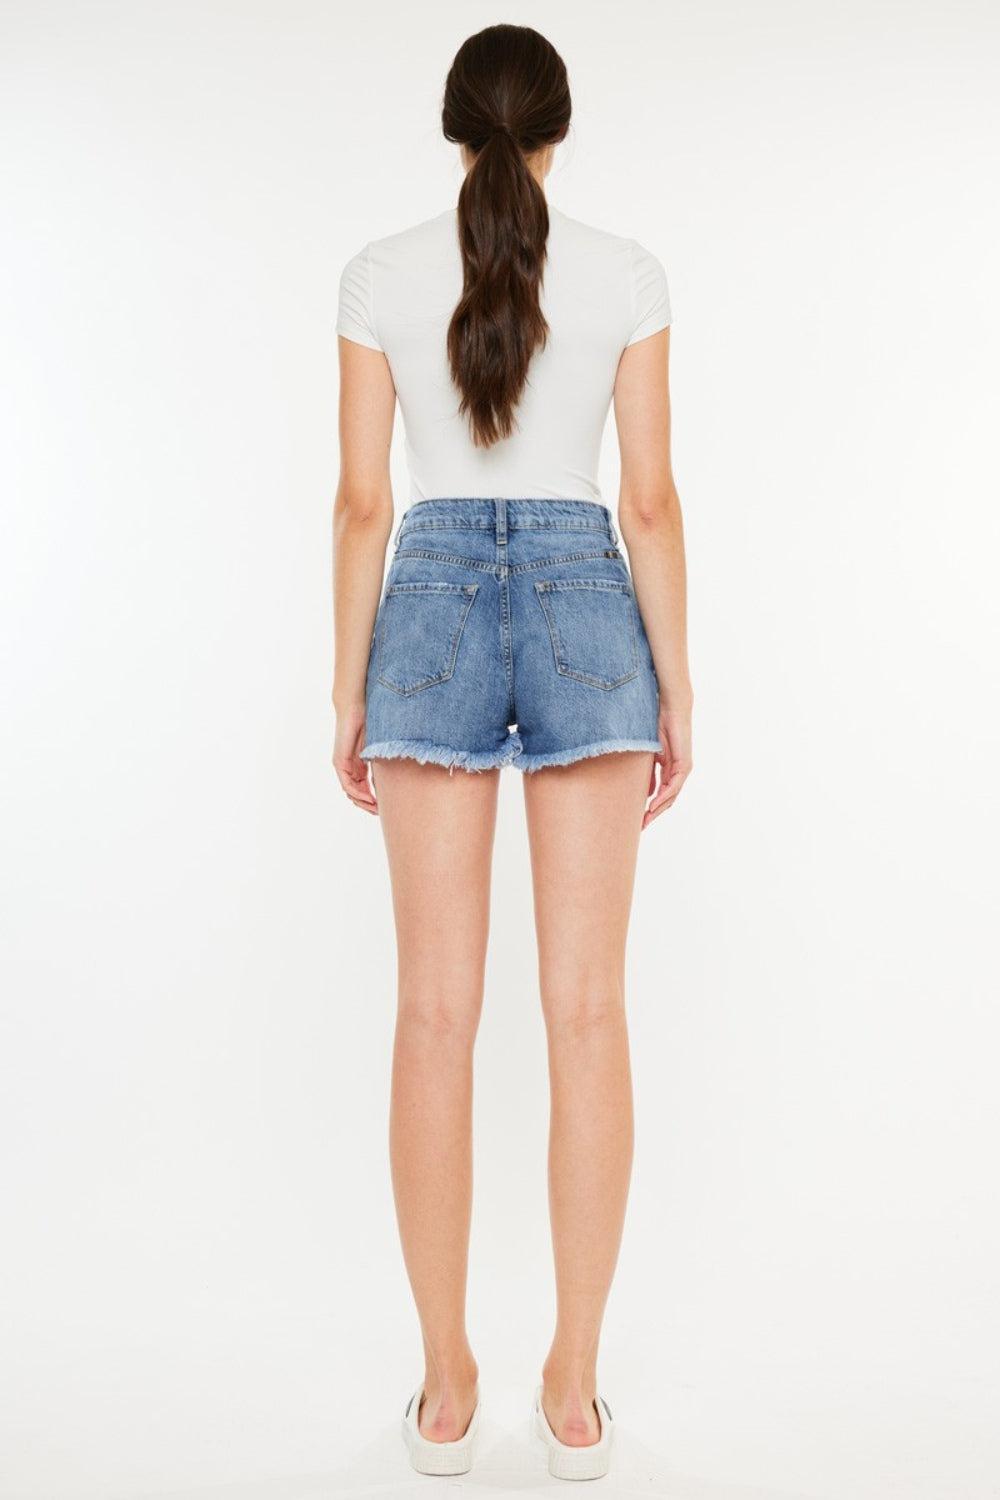 a woman in a white shirt and denim shorts